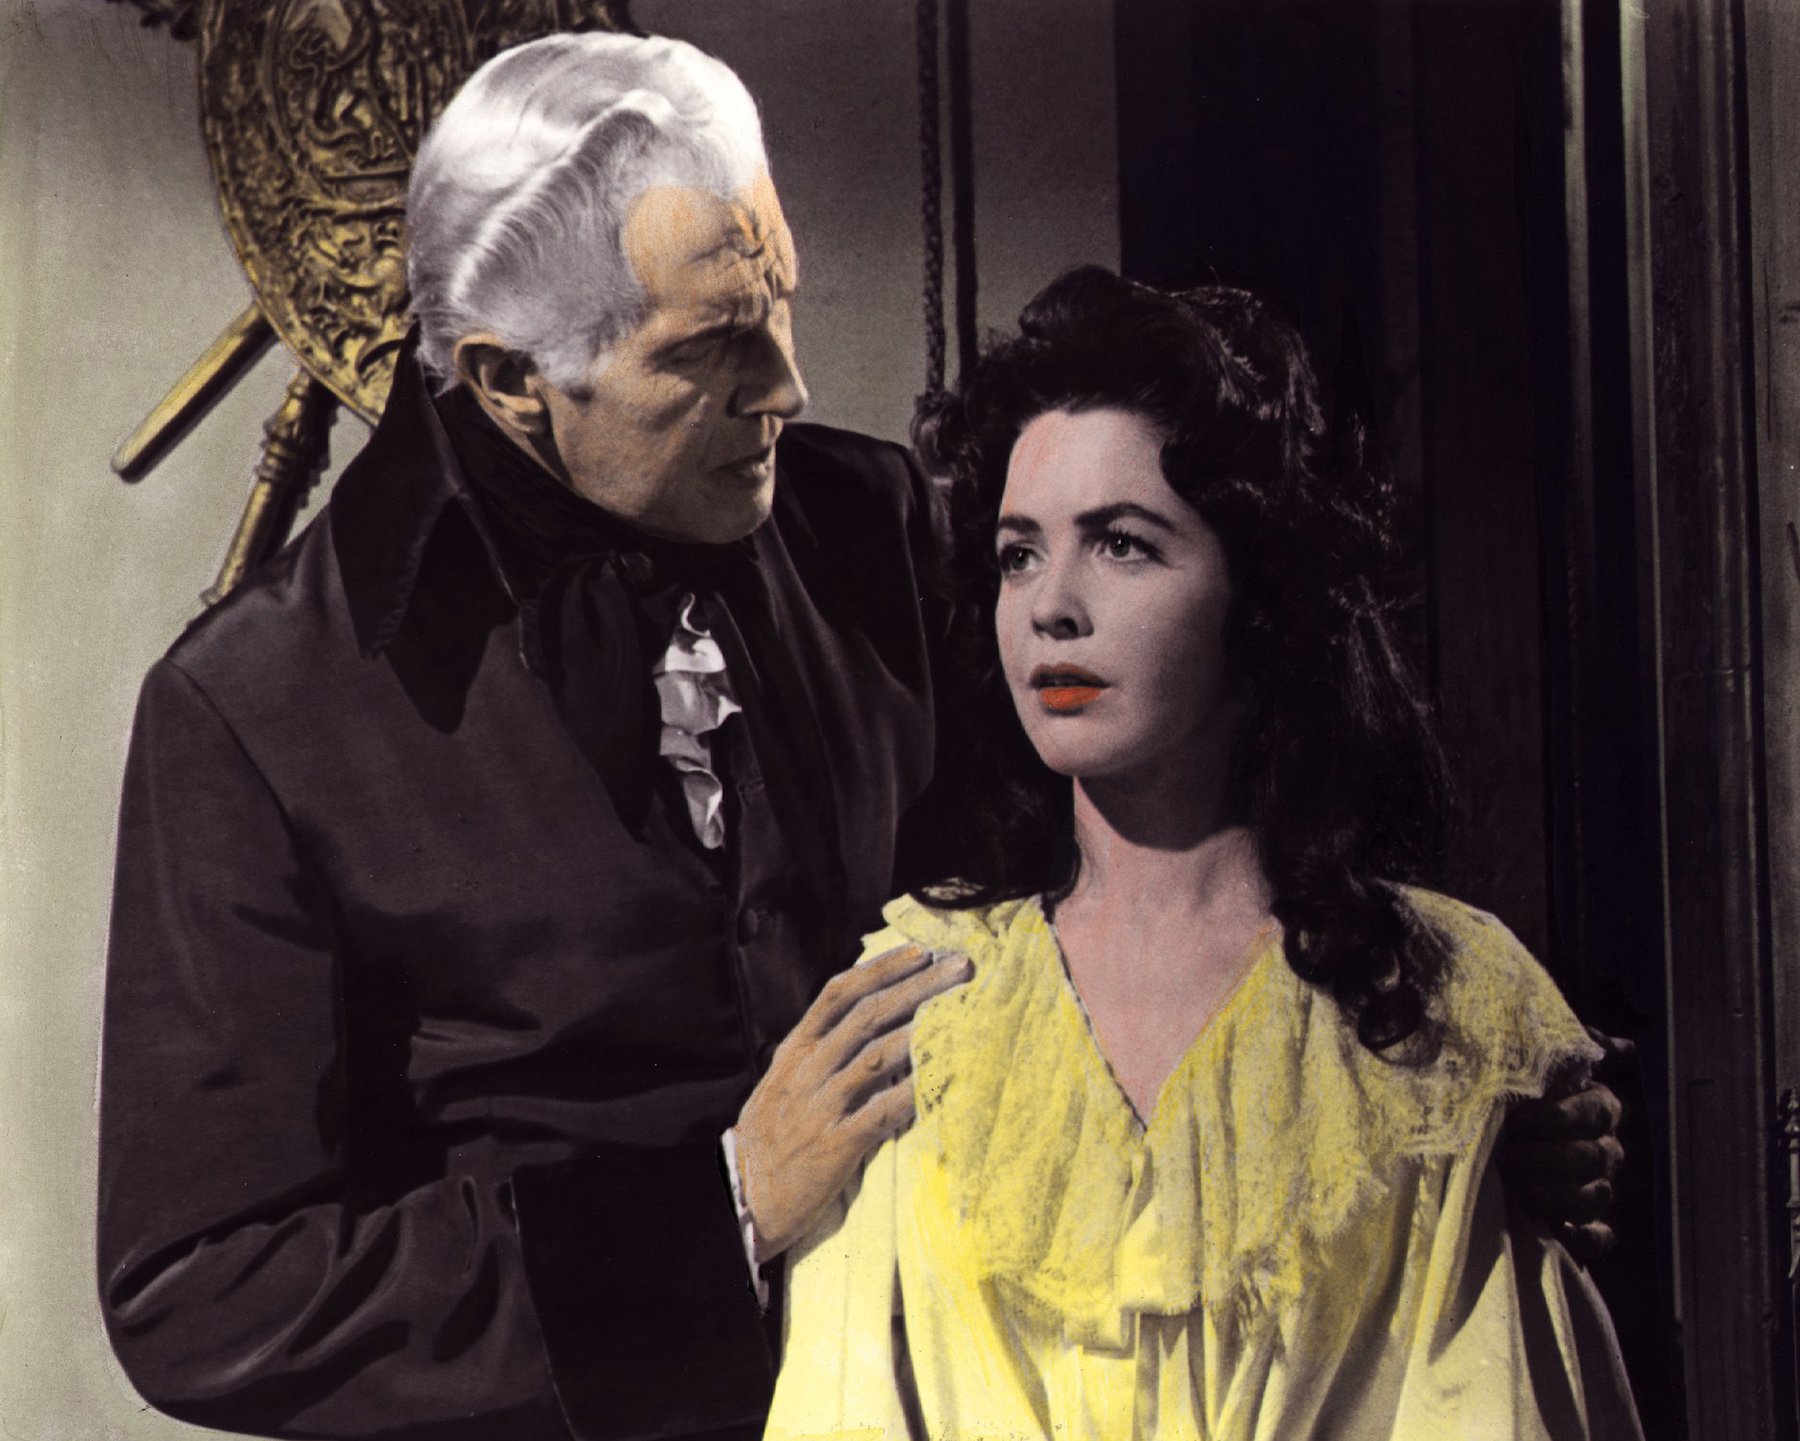 Vincent Price comforts Myrna Fahey in House of Usher